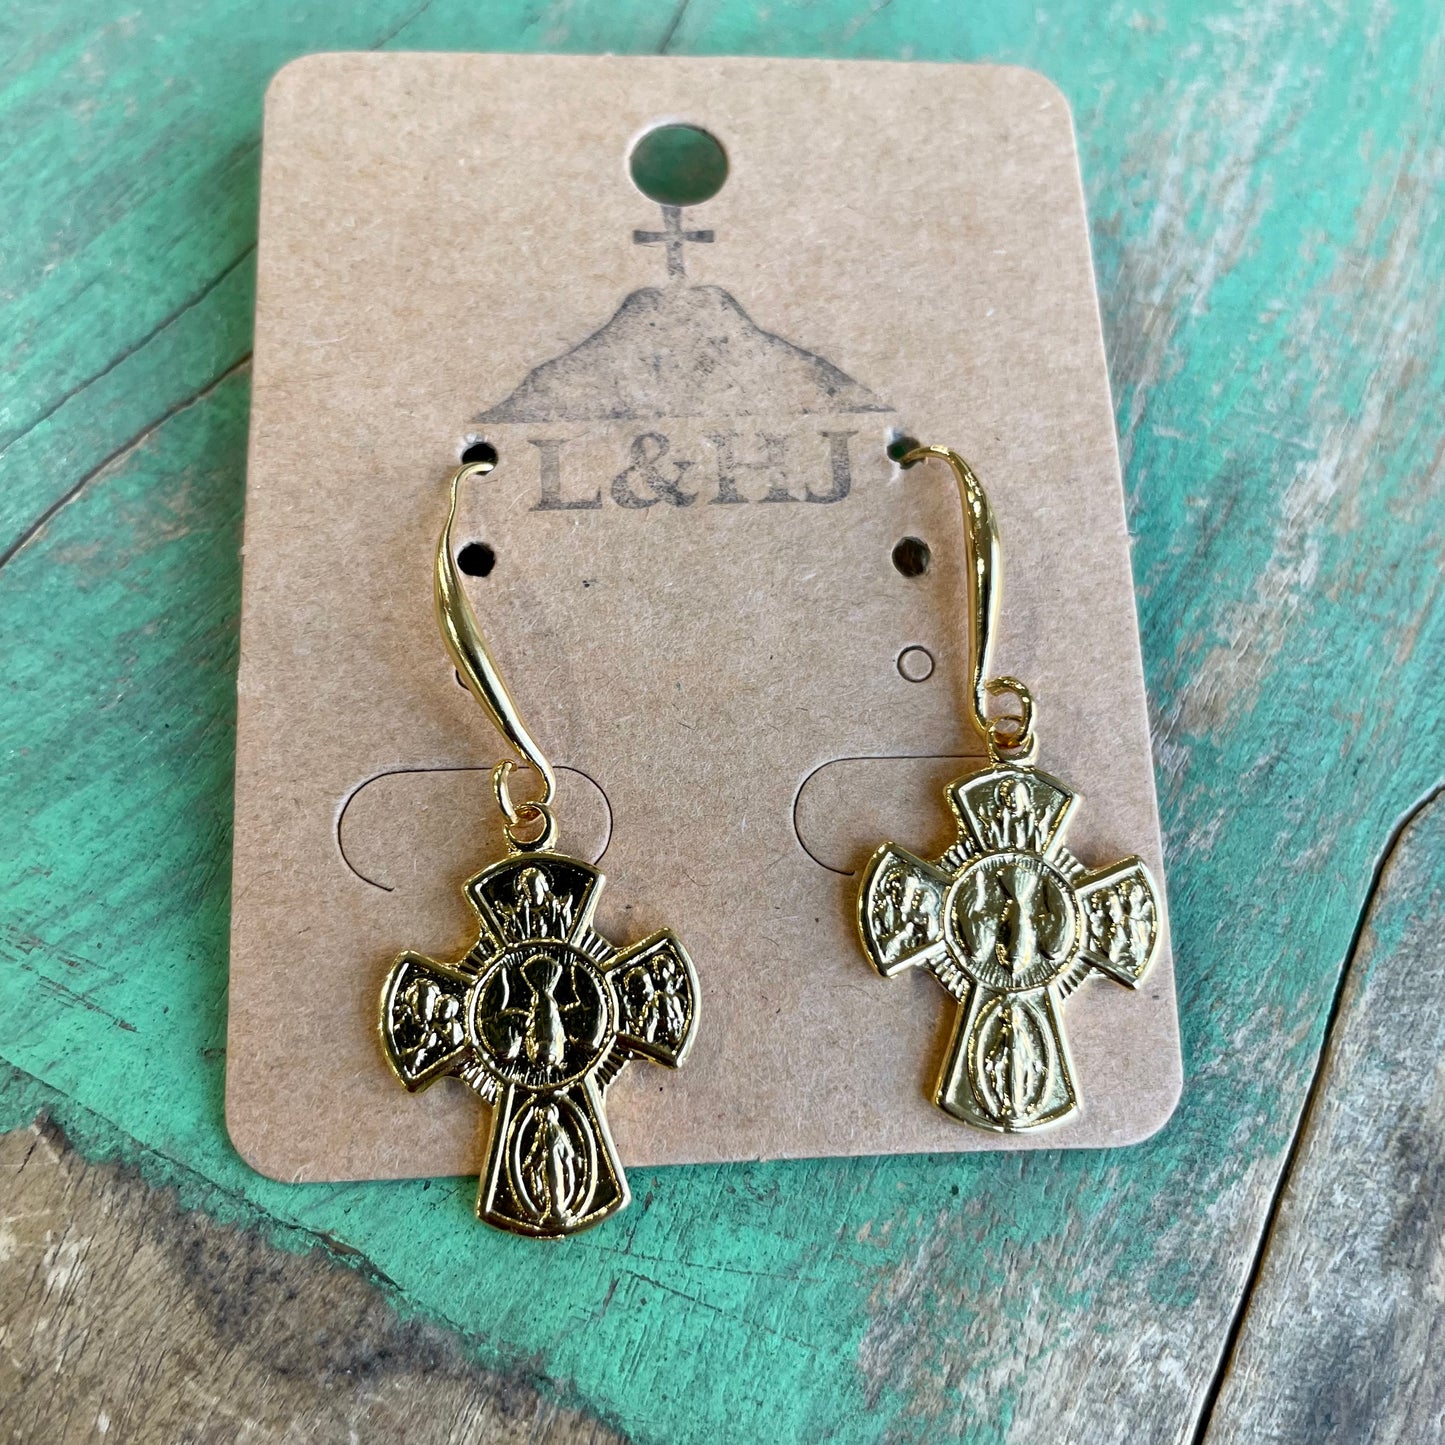 Gold Plated Religious Earrings